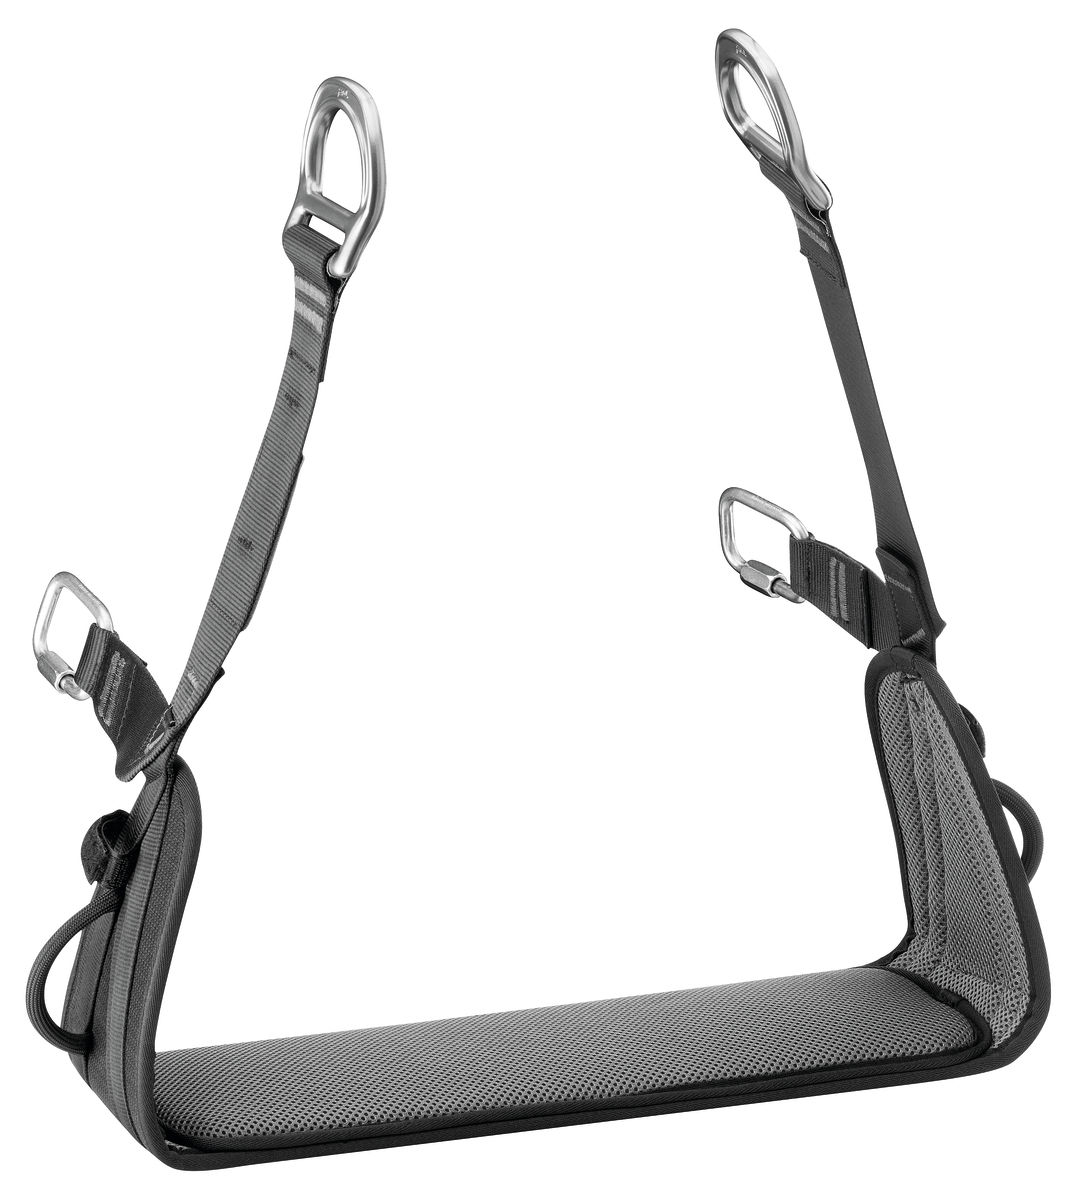 Petzl VOLT International Seat from GME Supply